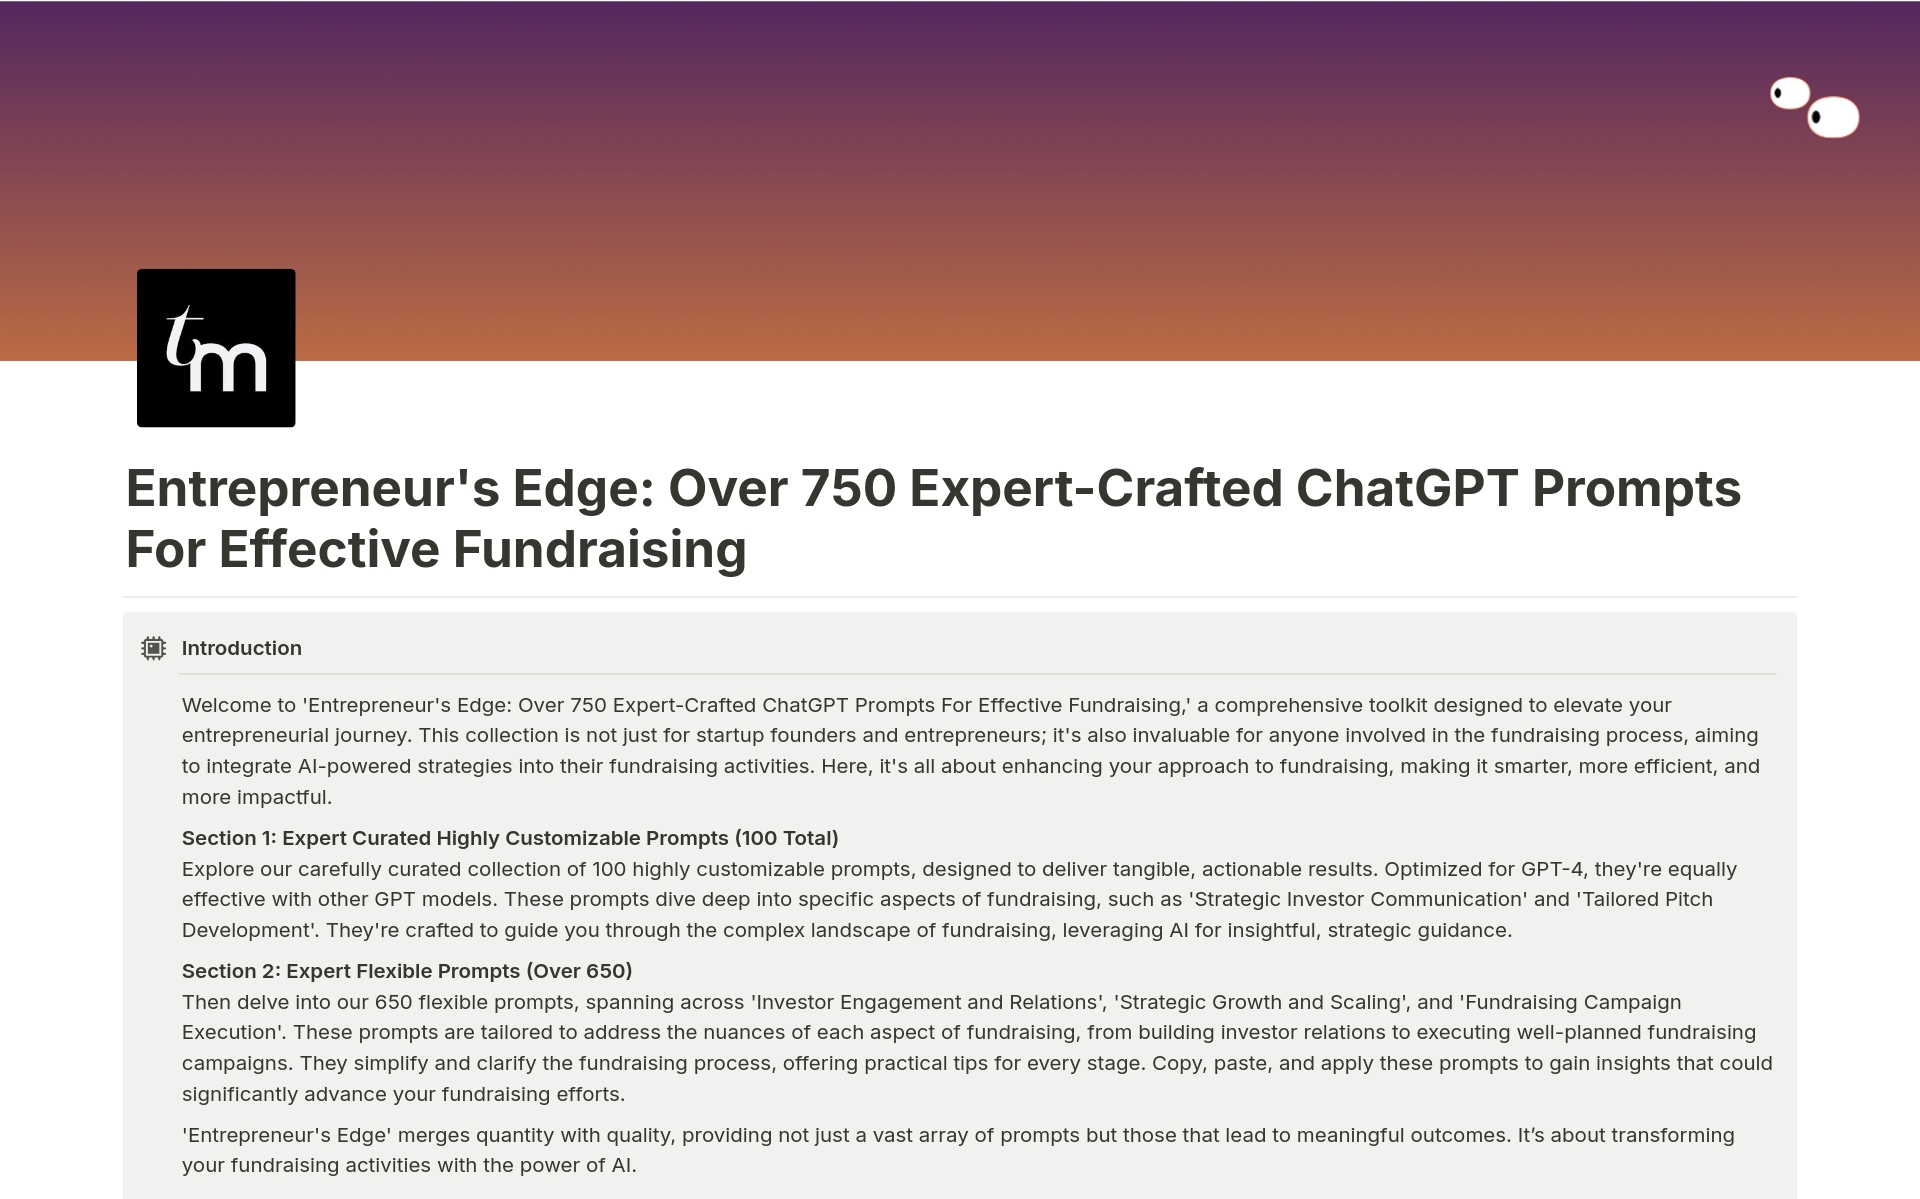 Entrepreneur's Edge - Fundraising Edition is a comprehensive Notion document that arms entrepreneurs with strategic prompts and insights for successful fundraising. It includes over 750 ChatGPT prompts, making securing funds for your startup easier than ever!